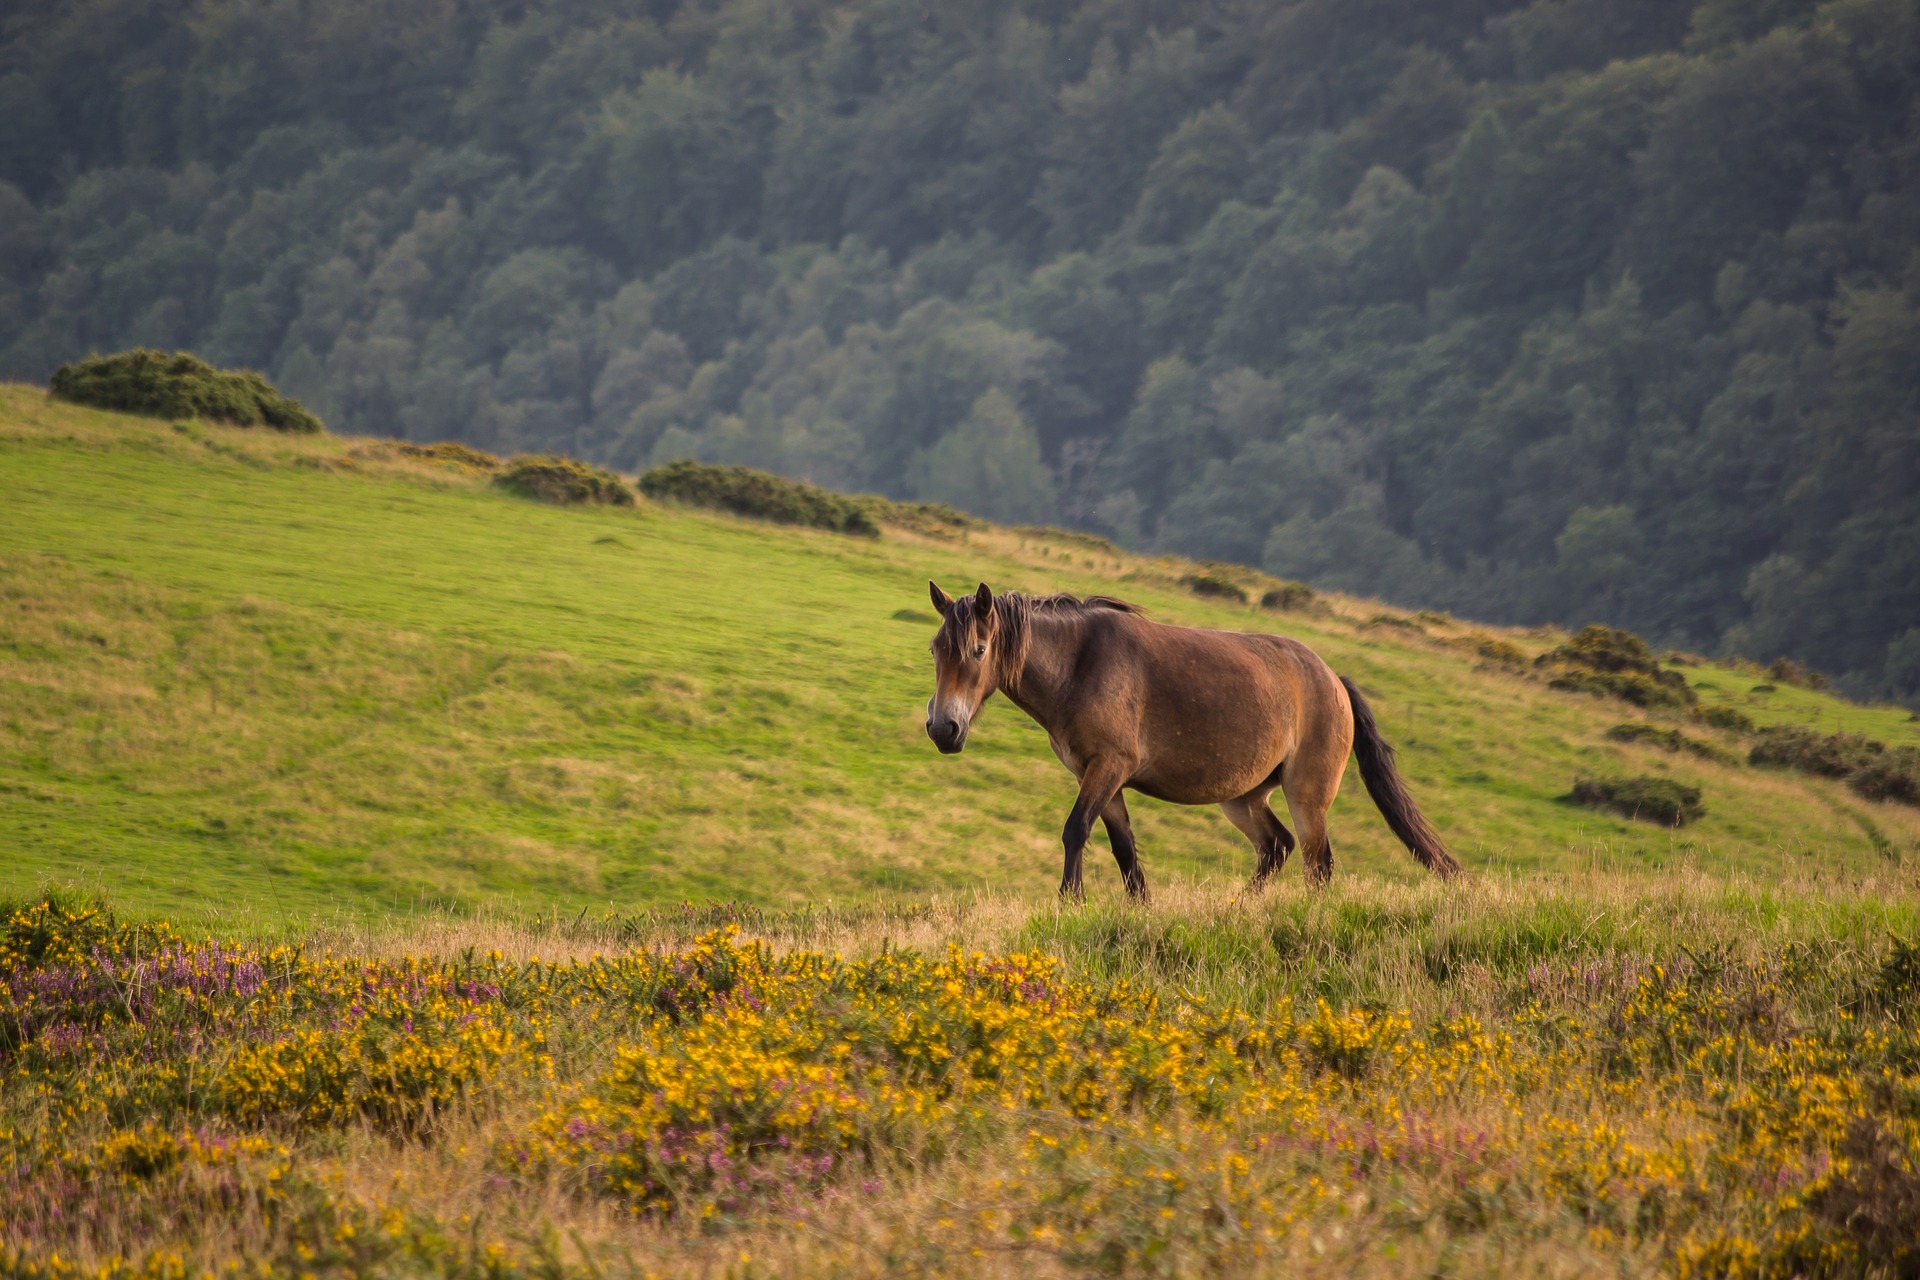 A brown wild pony is walking across a field that extends down into woodland in the distance.